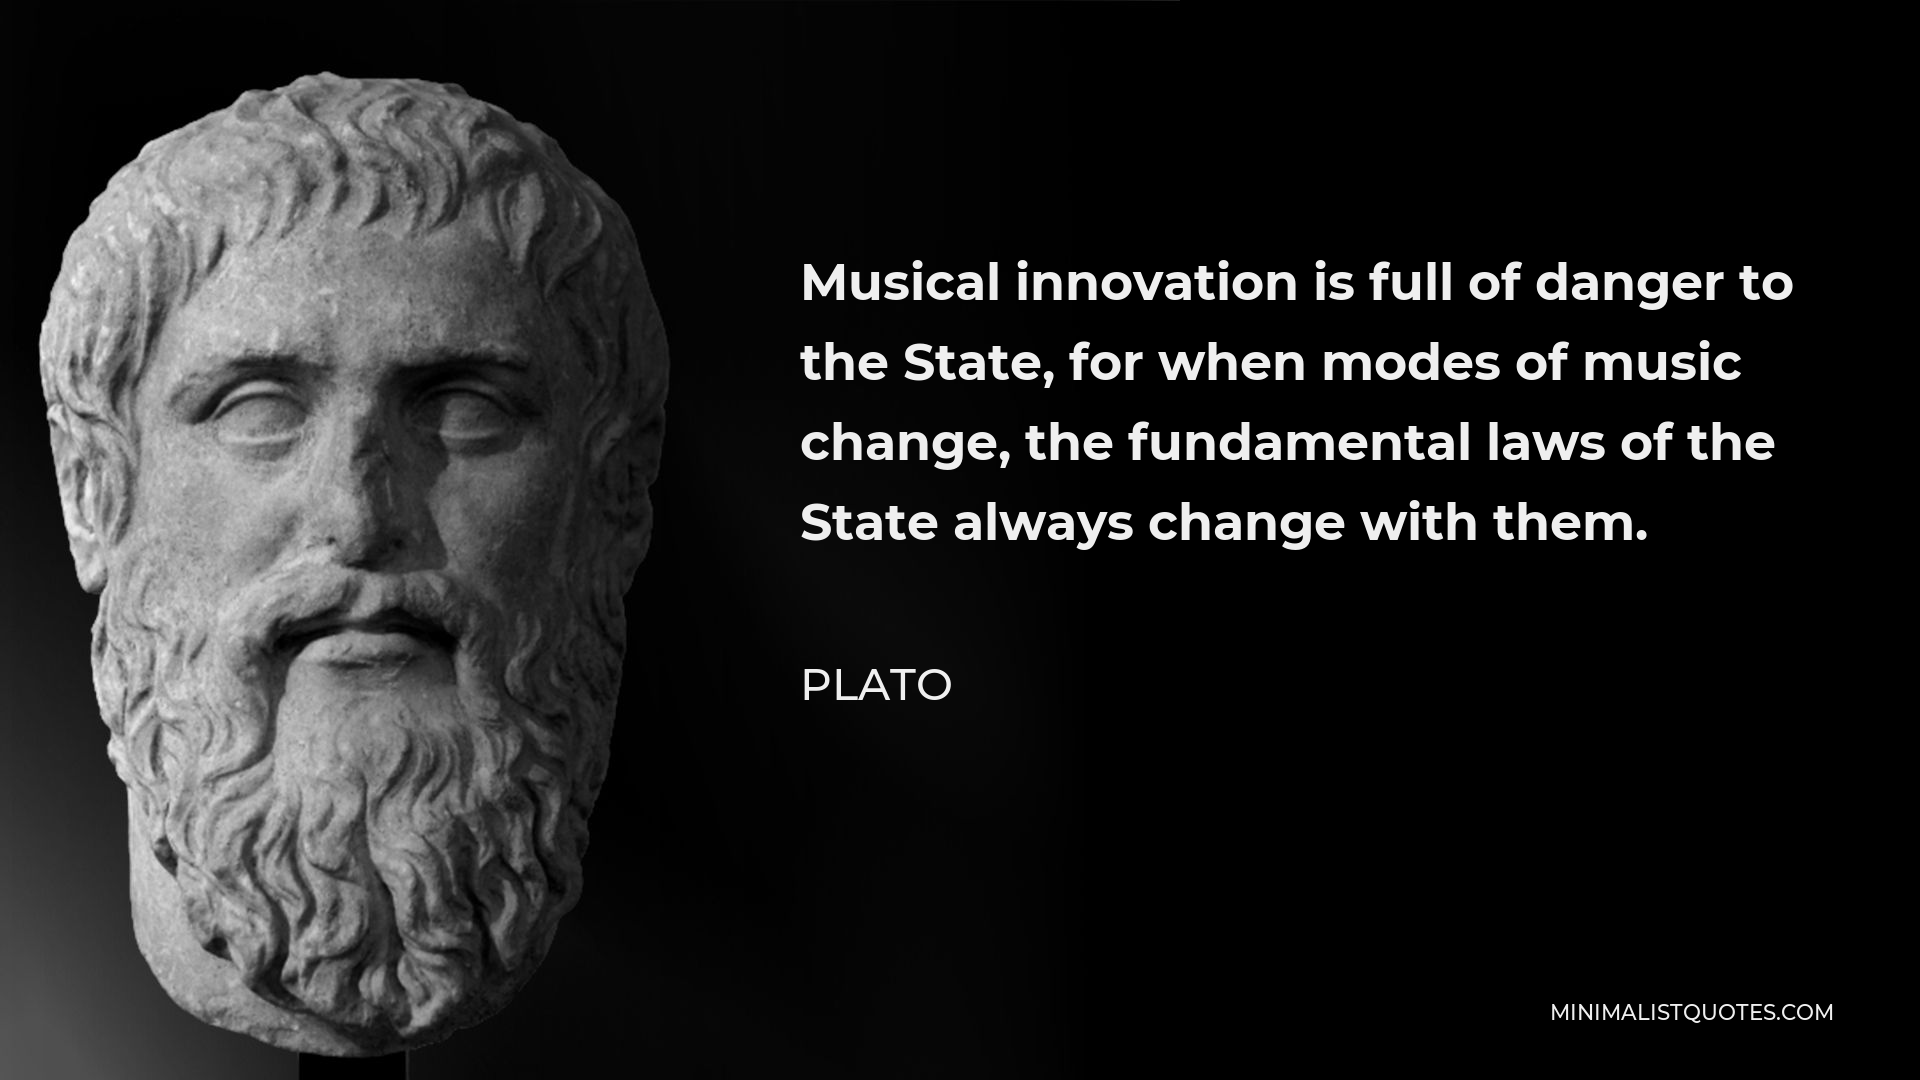 Plato Quote - Musical innovation is full of danger to the State, for when modes of music change, the fundamental laws of the State always change with them.